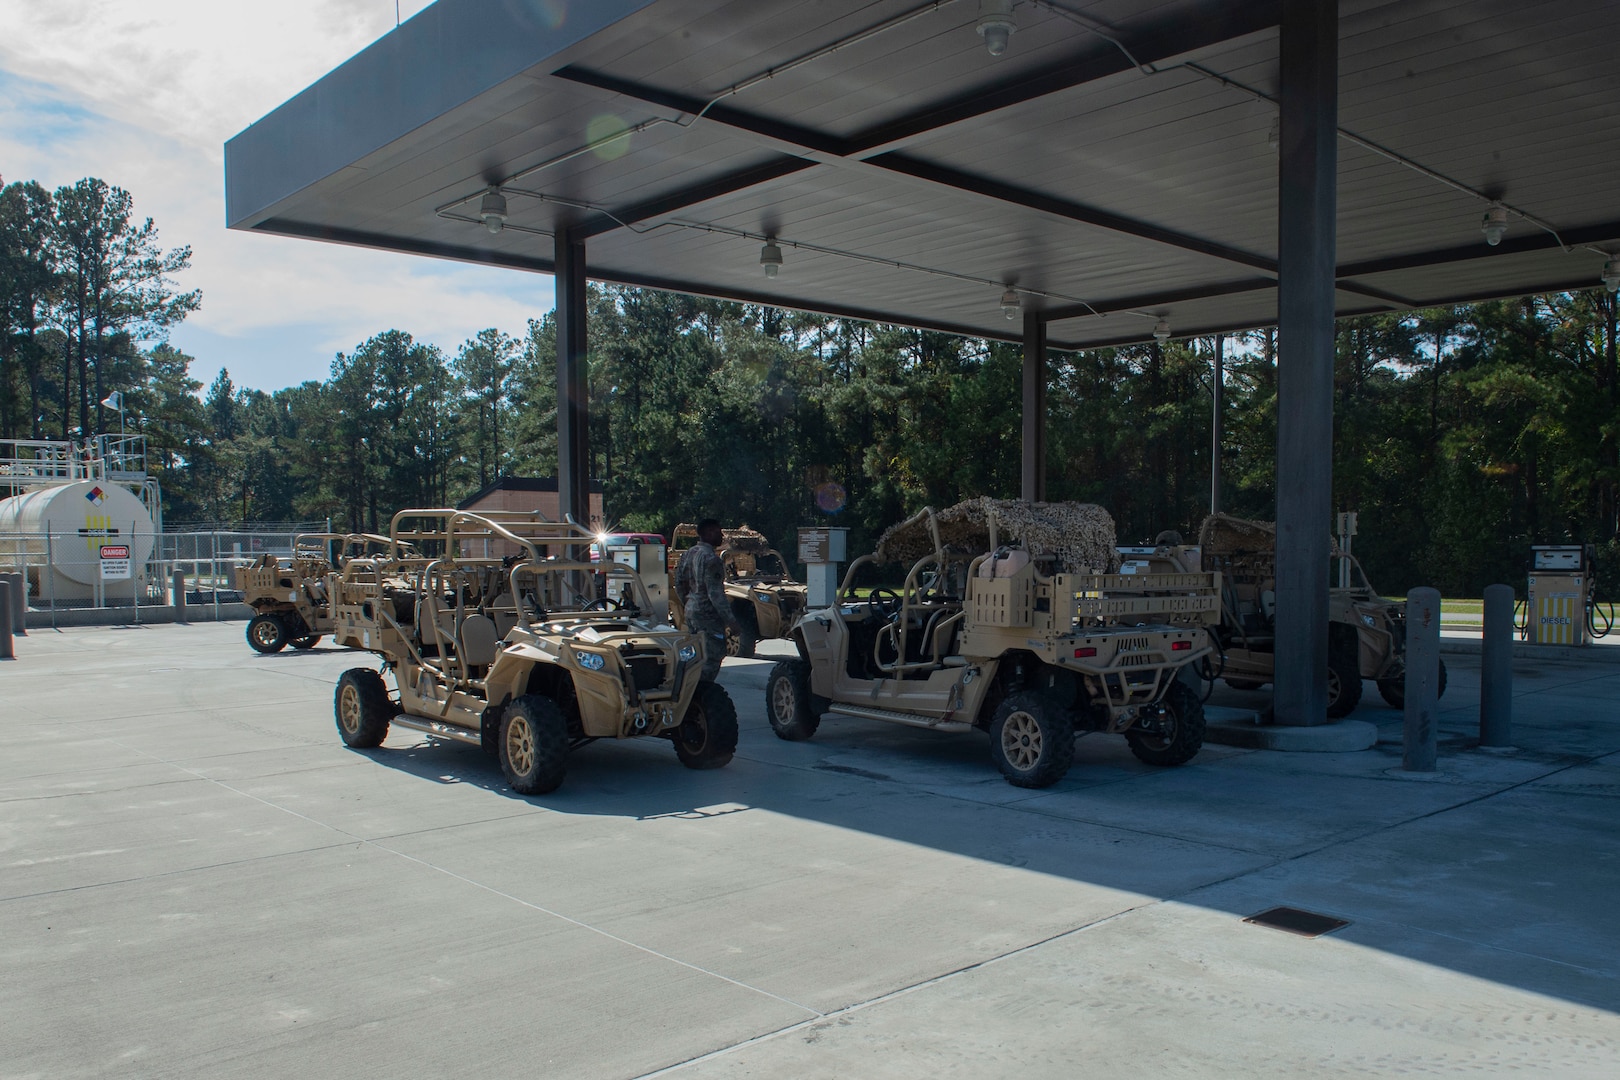 Airmen use the base service station to refuel government owned vehicles Nov. 6, 2019, at Moody Air Force Base, Ga. The 23d LRS fuels facilities is responsible for maintaining facilities, product purity, storage and accountability. Fuels facilities Airmen maintain the base service station by performing routine checks on the operating valves, fuel tanks and service station parts. (U.S. Air Force photo by Airman Azaria E. Foster)